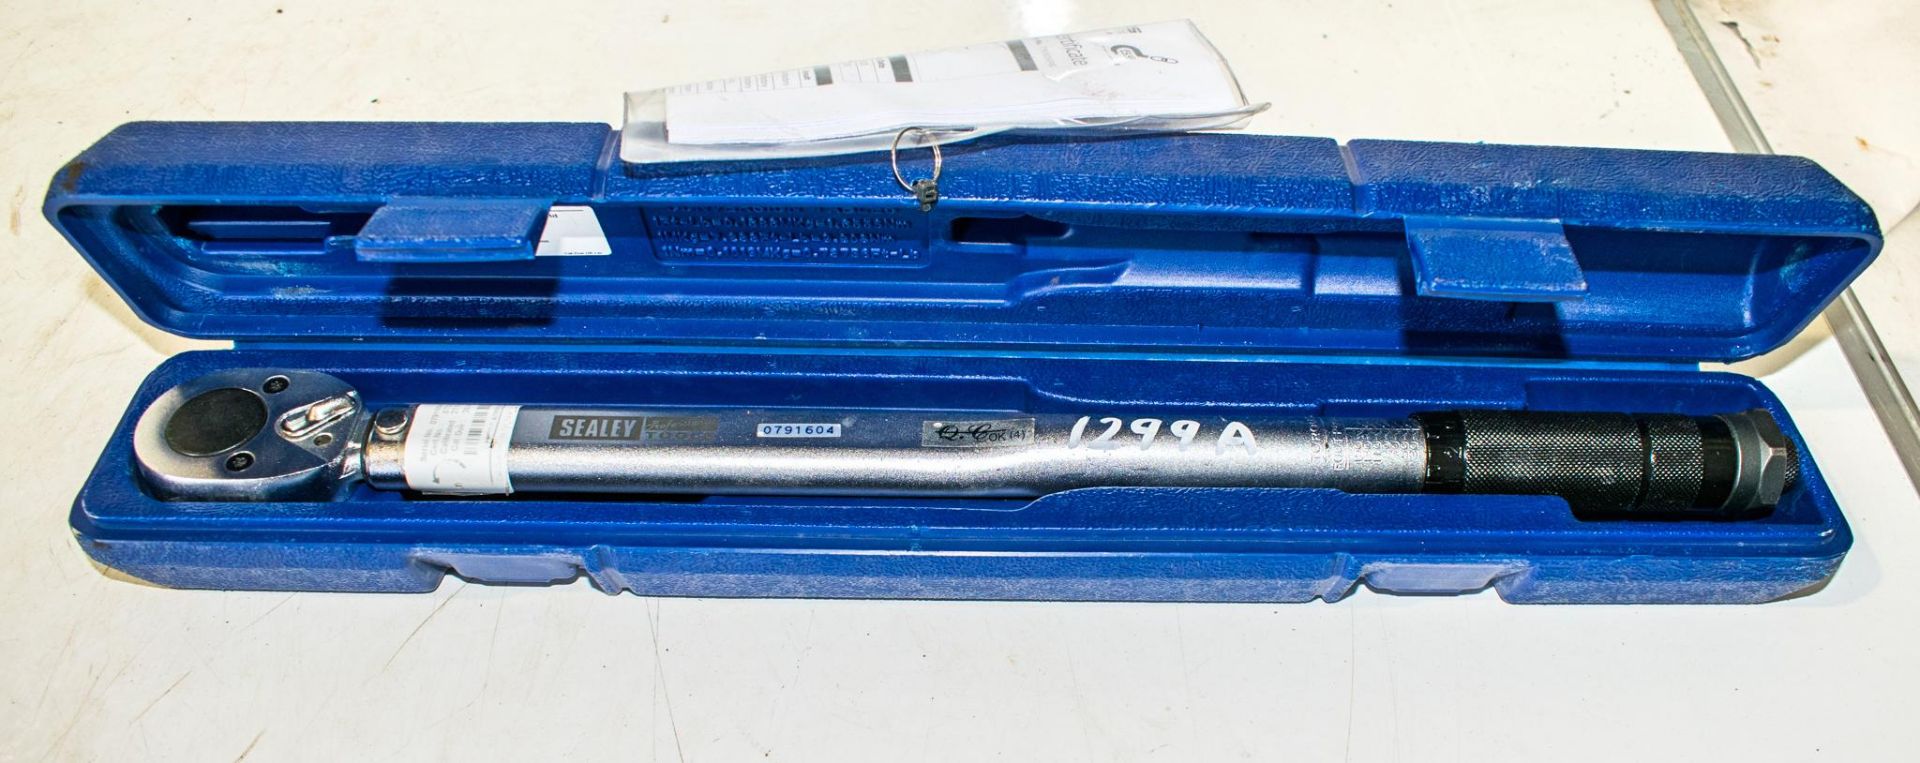 Sealey torque wrench c/w carry case A788621